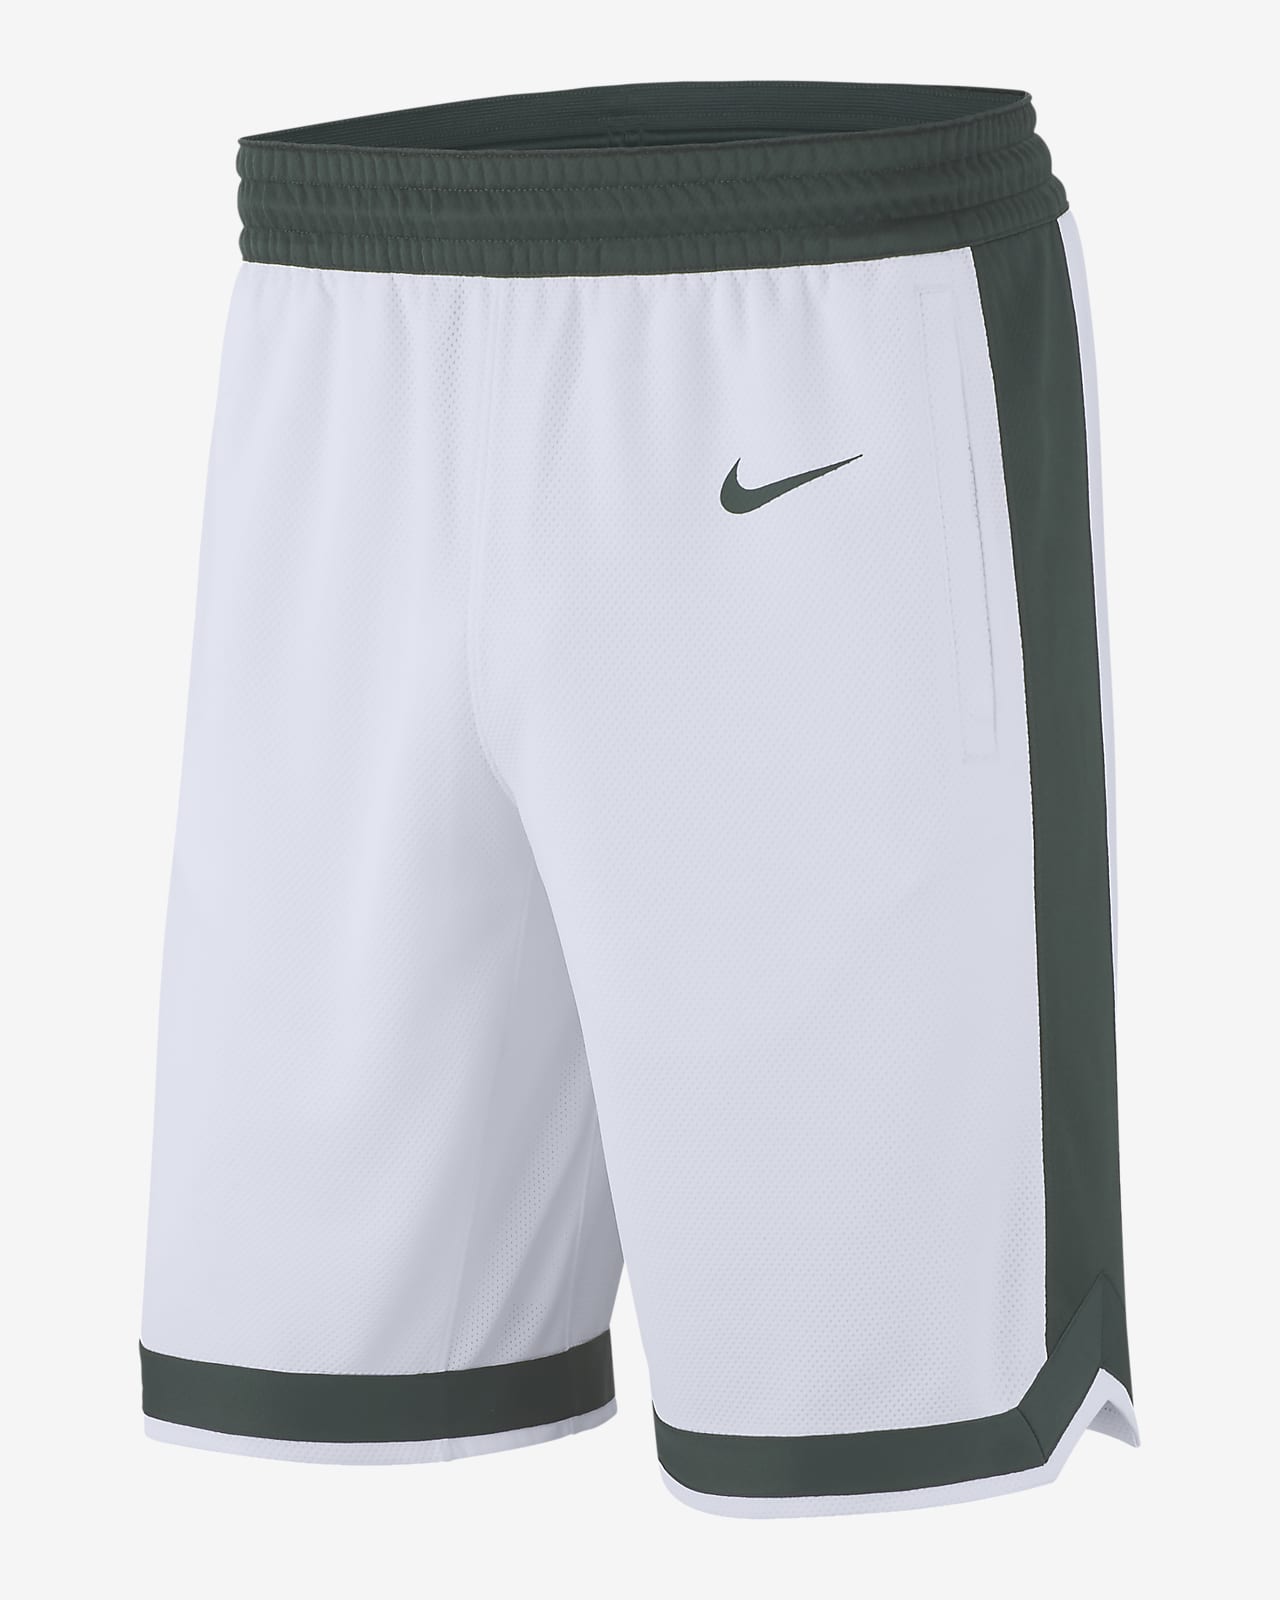 abstract detectie dat is alles Nike College (Michigan State) Men's Replica Basketball Shorts. Nike.com